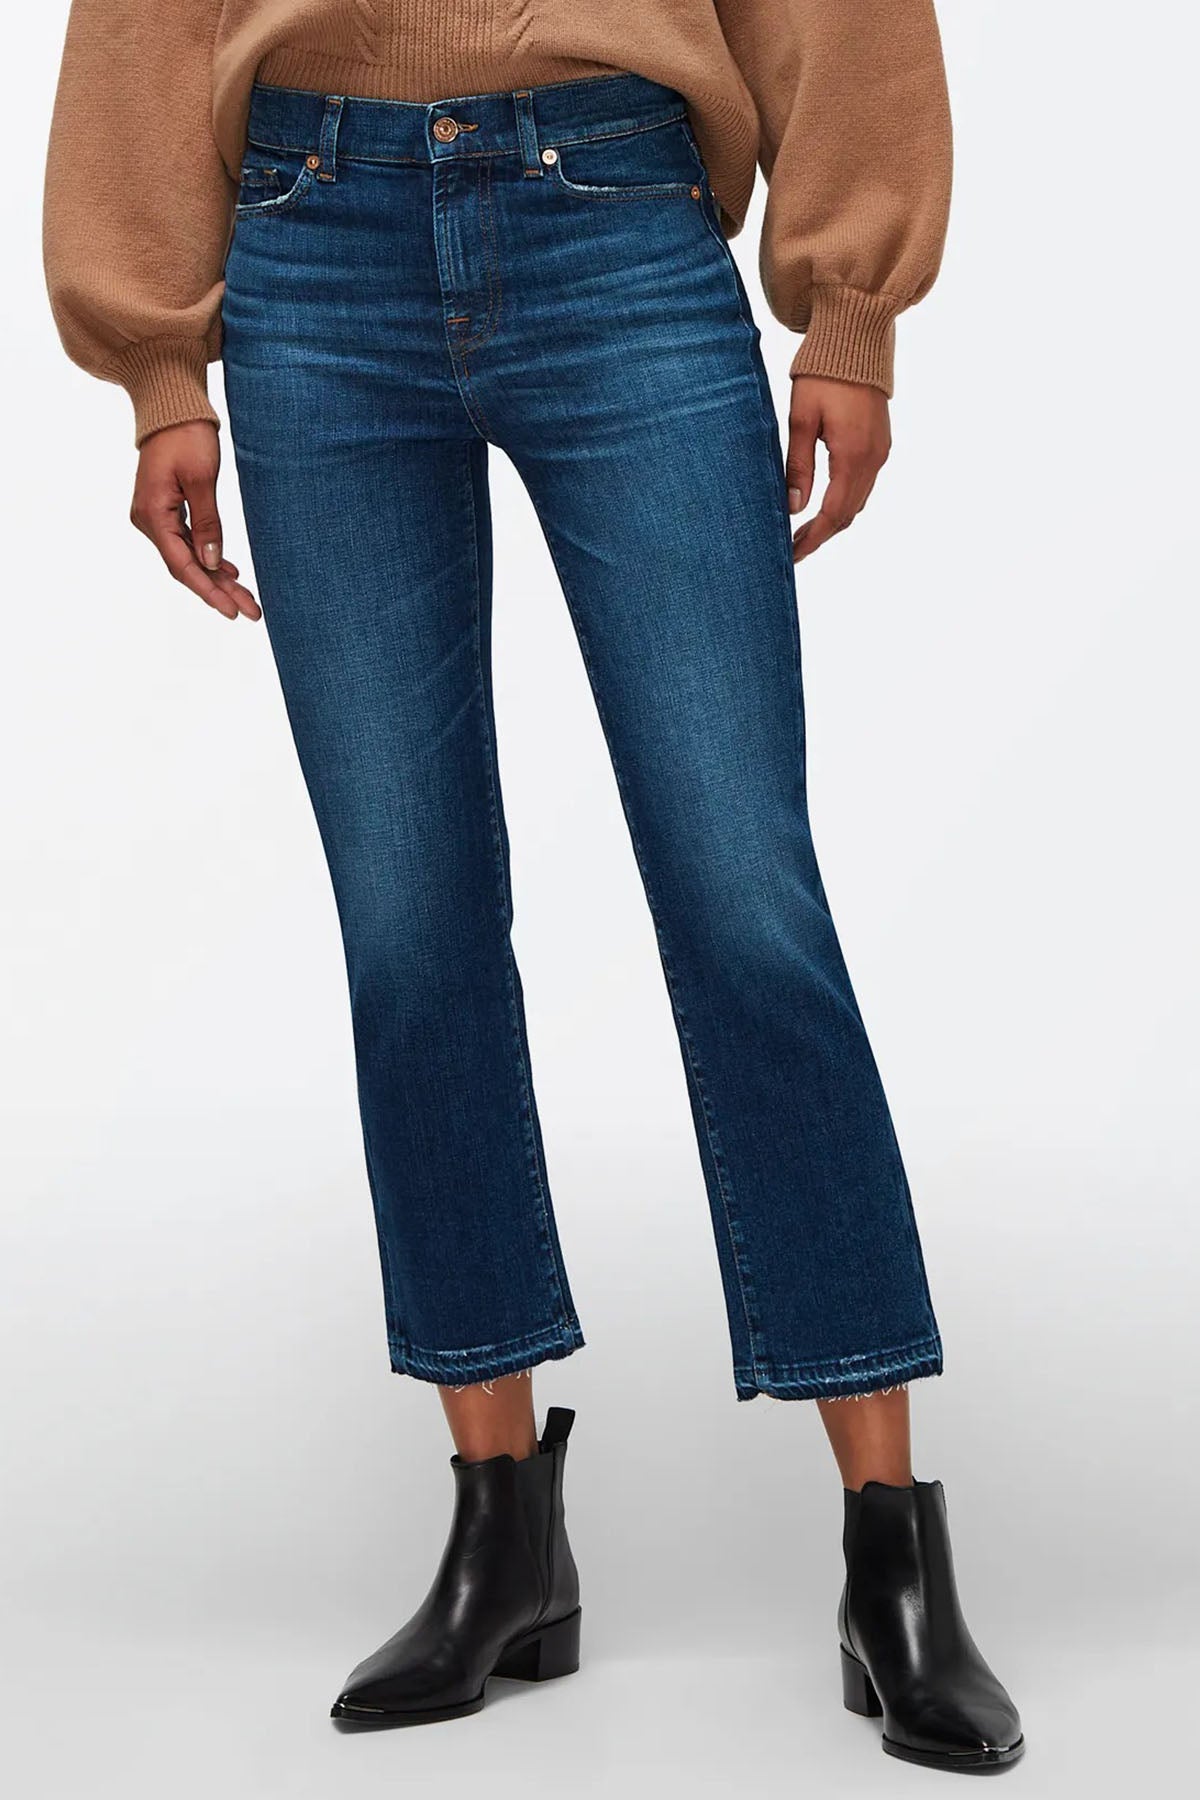 7 For All Mankind The Straight Crop Slim Illusion Jeans-Libas Trendy Fashion Store